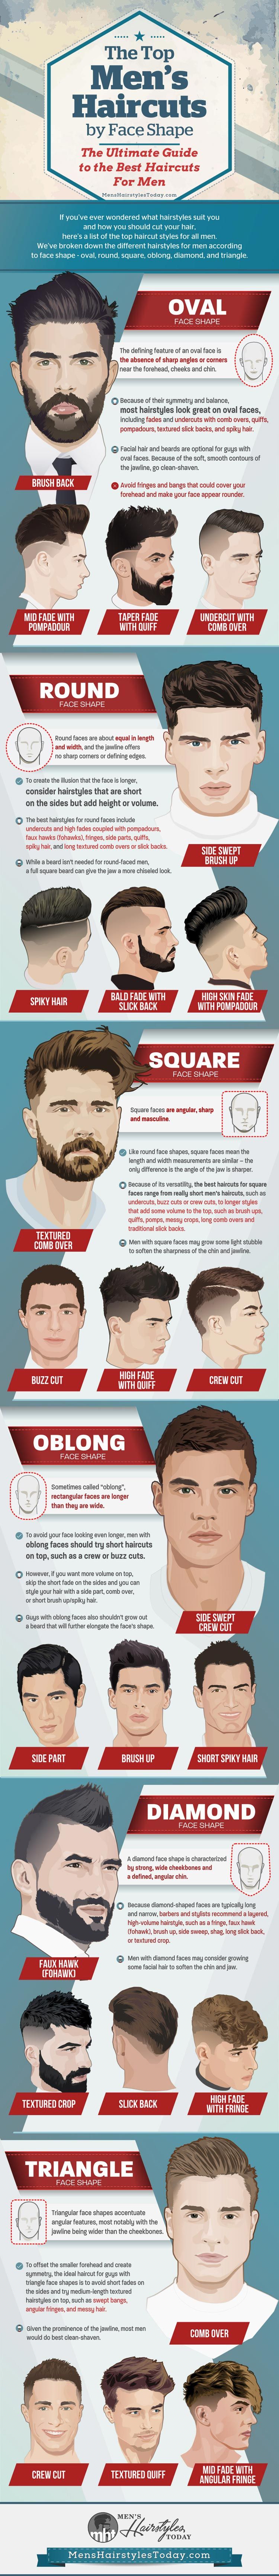 Best Haircuts For Men By Face Shape #Infographic